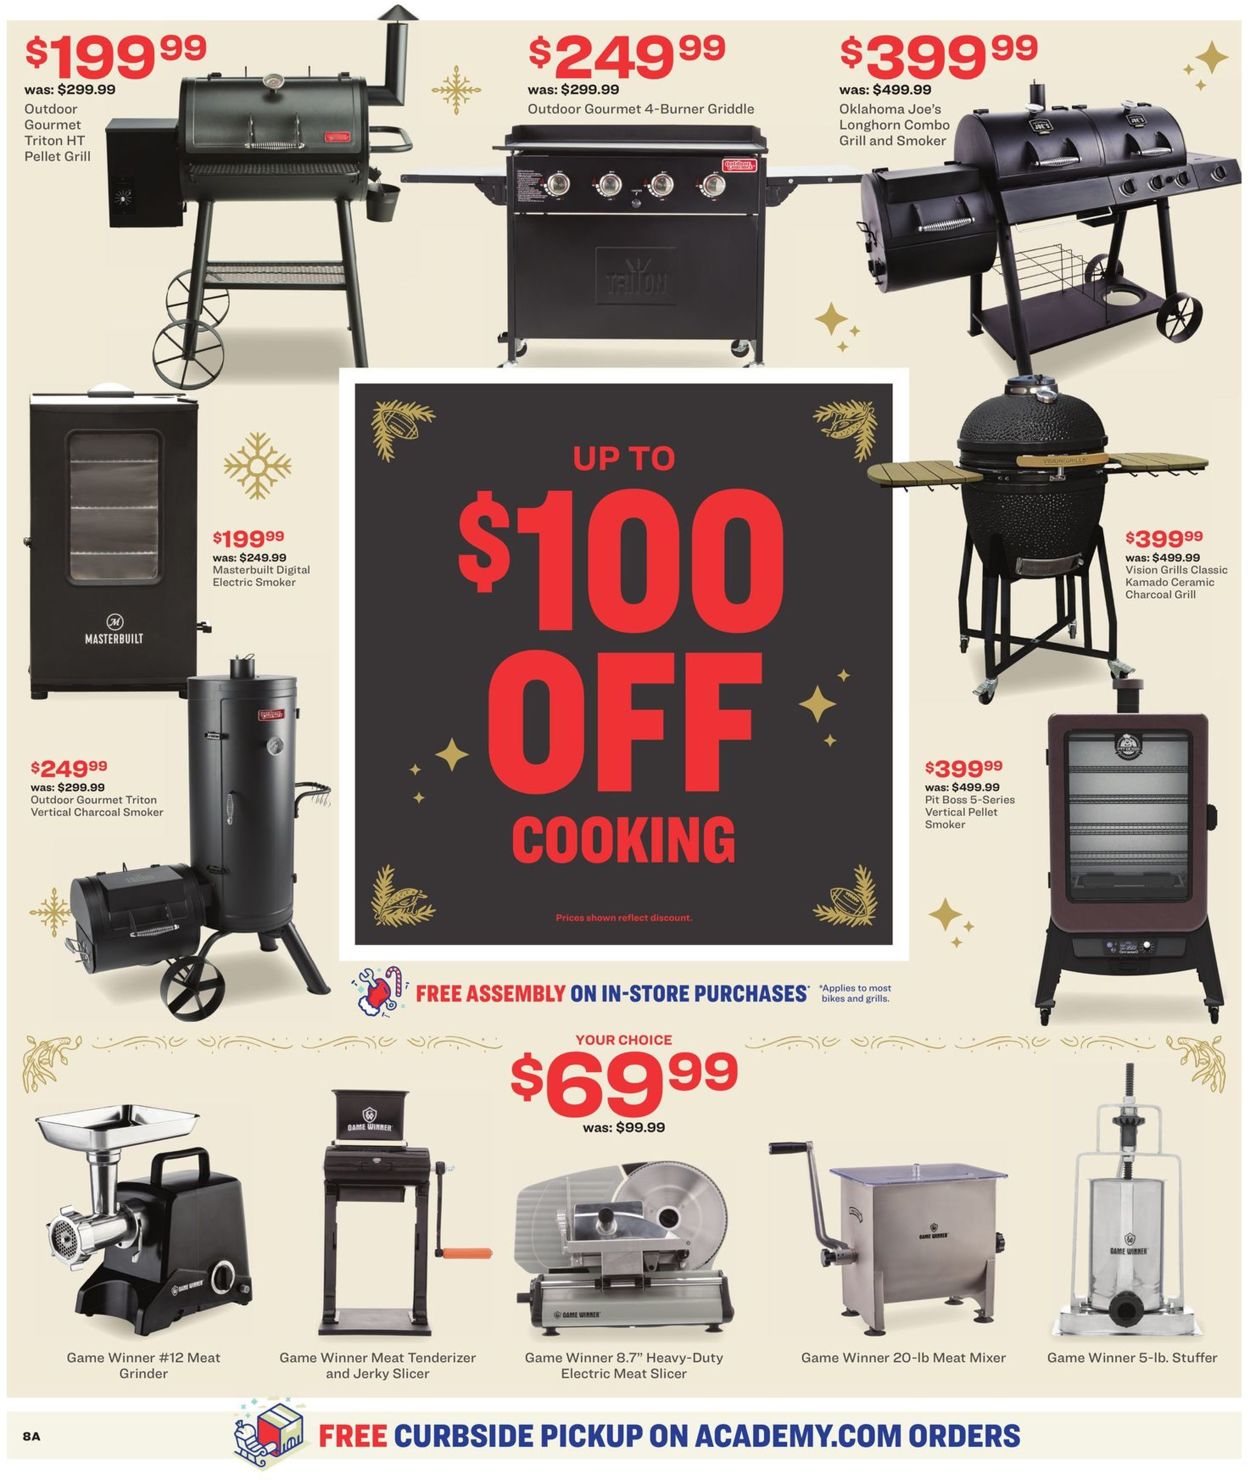 Academy Sports Black Friday 2020 Current Weekly Ad 1127 - 11272020 9 - Frequent-adscom